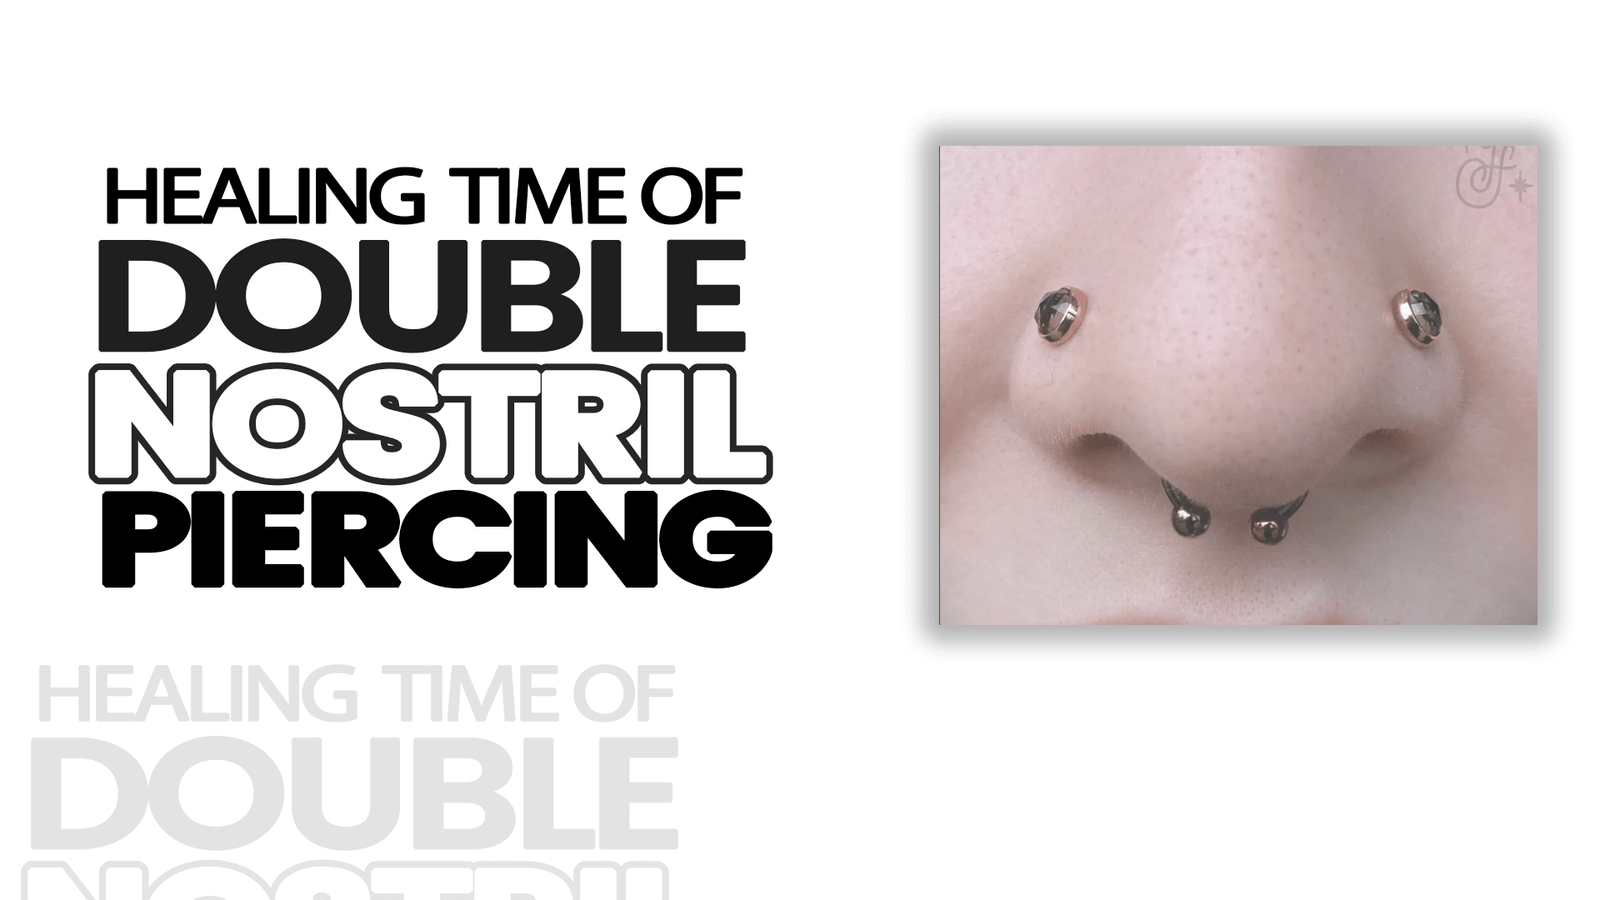 Healing time of Double Nostril Piercing